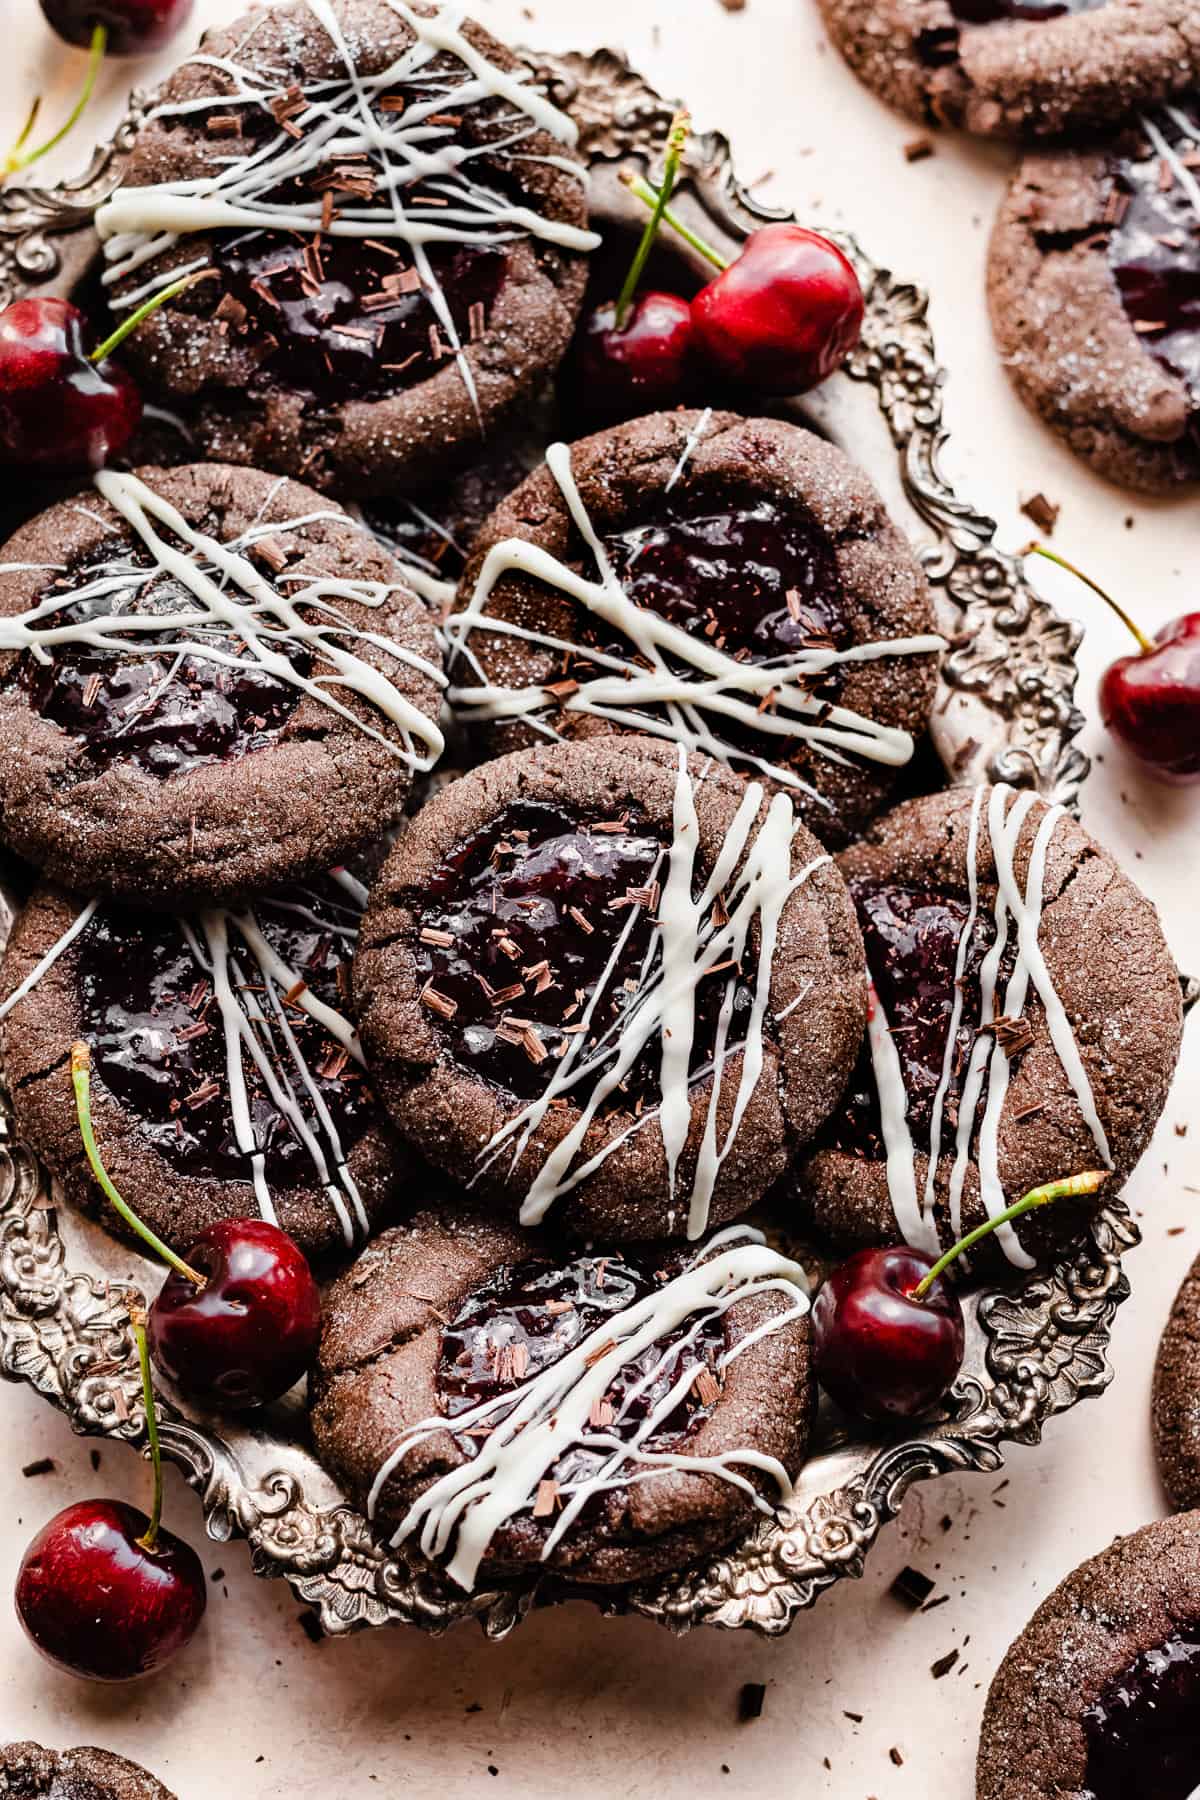 Black forest cookies in a vintage metal tray with cherries scattered around.